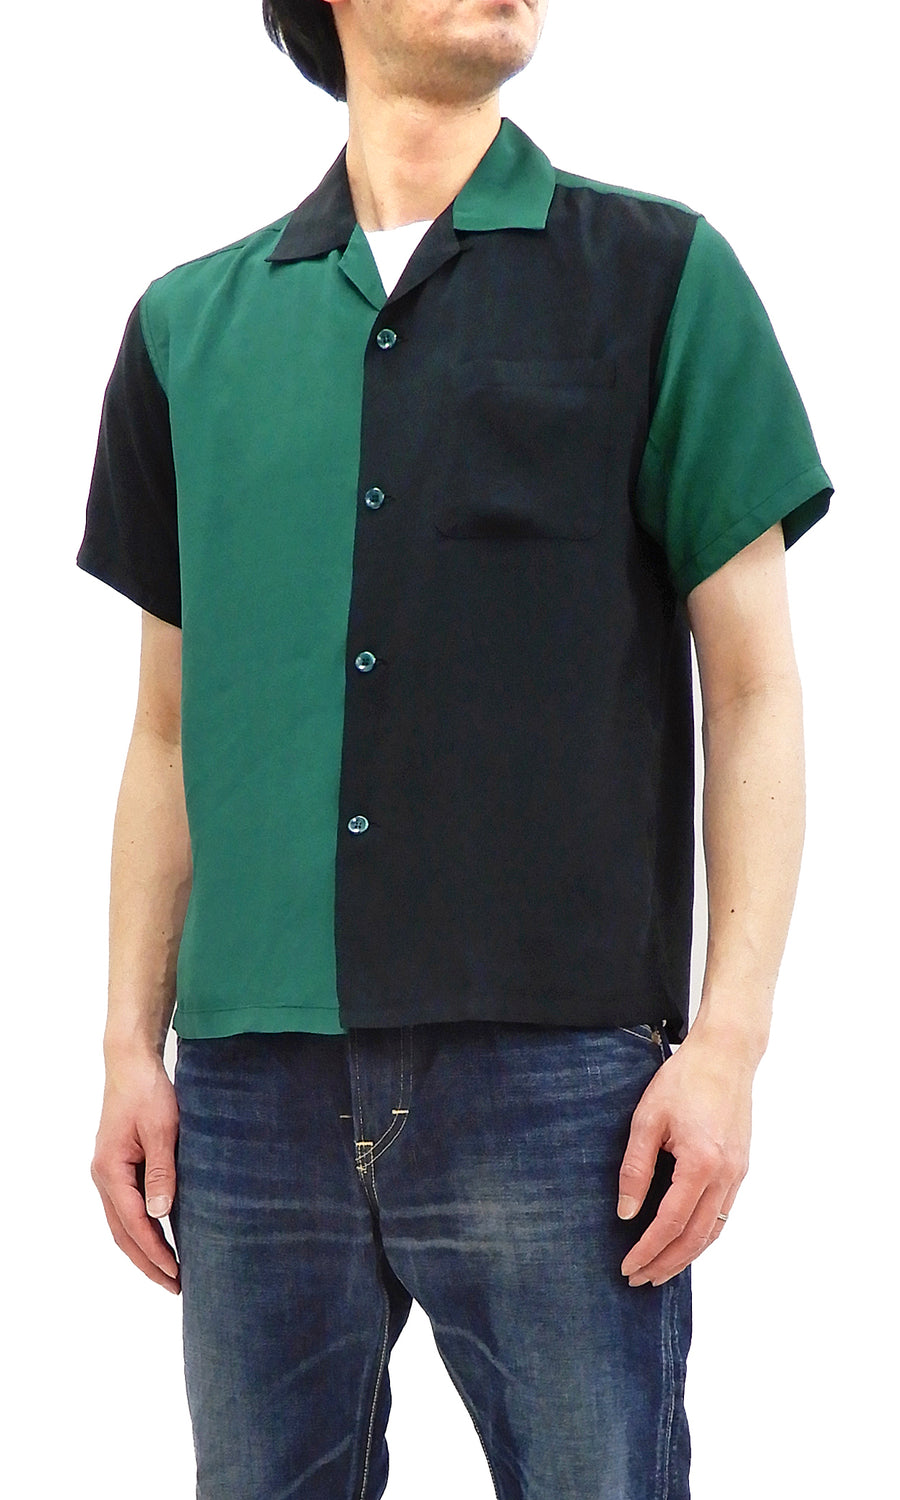 Style Eyes Bowling Shirt Men's 1950s Style Two-Tone Panel Short Sleeve Button Up Shirt SE38370